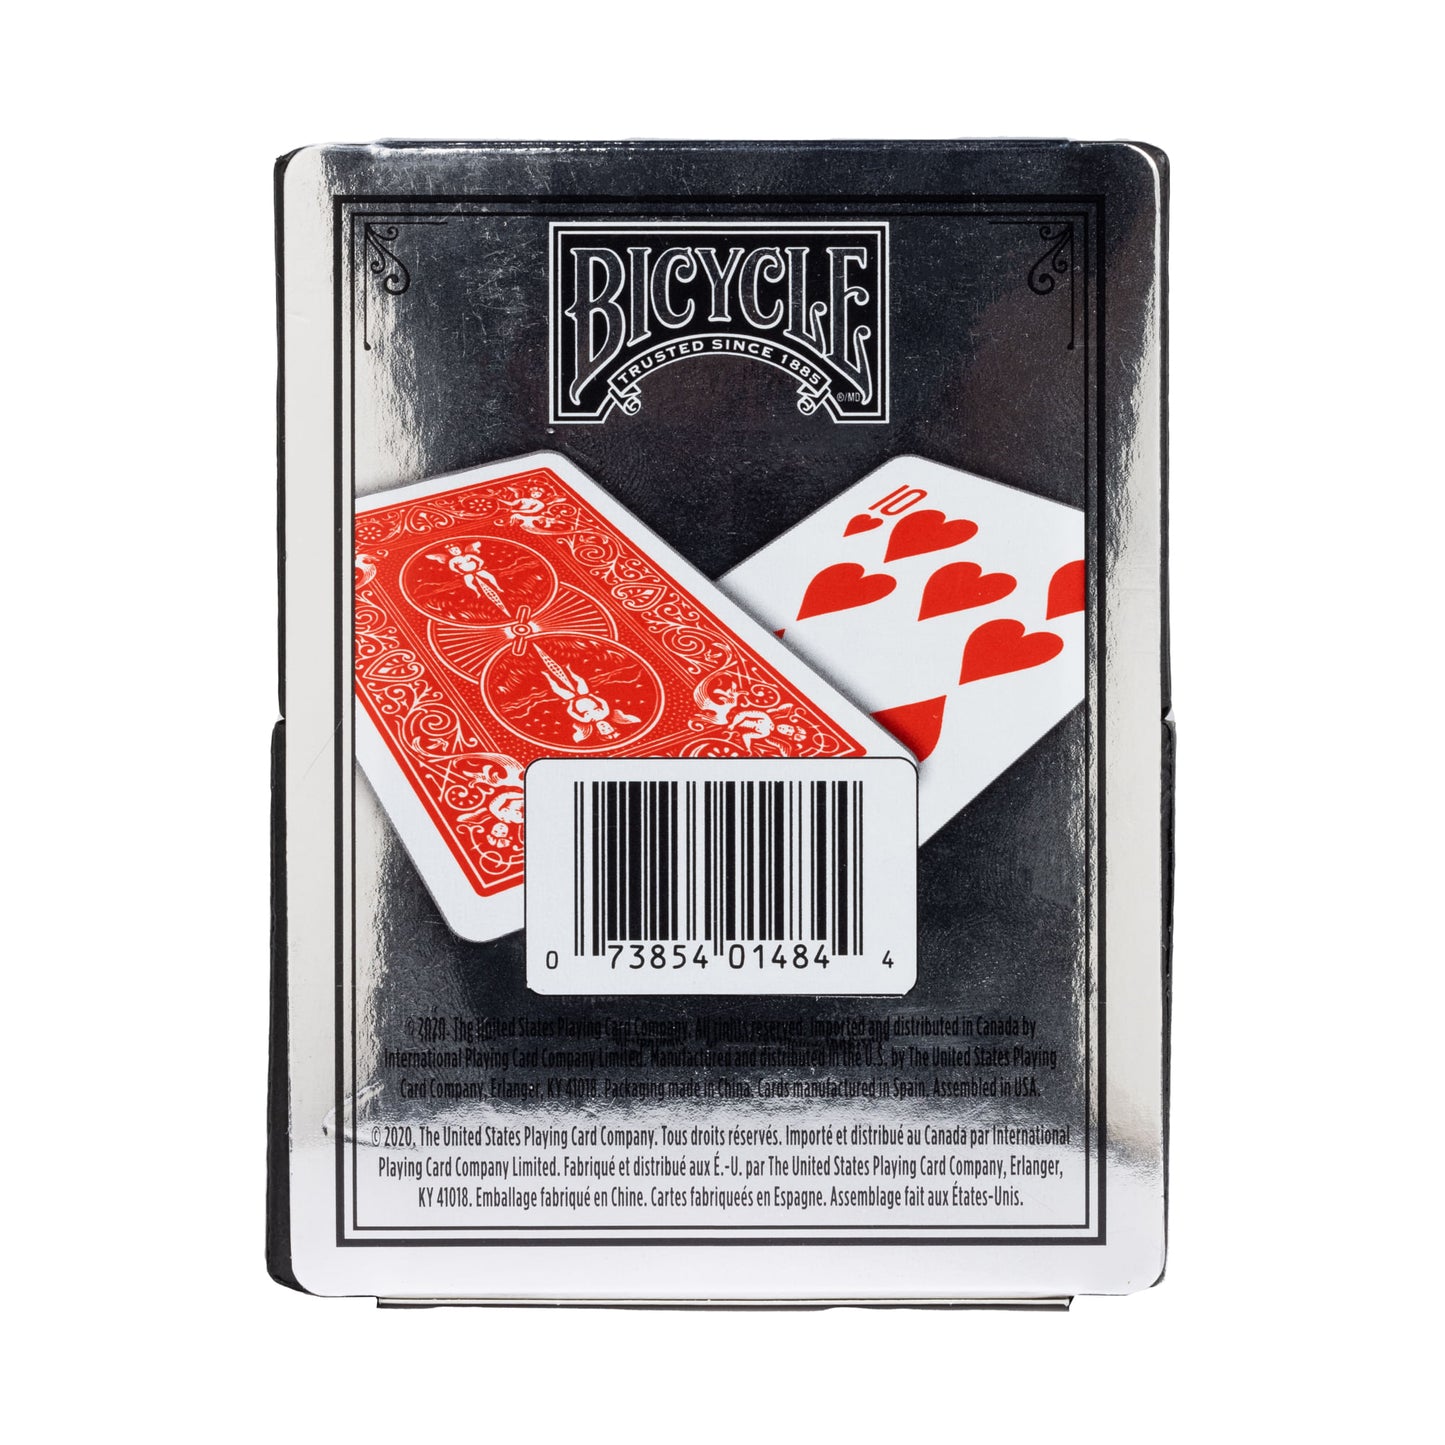 Bicycle Prestige Plastic Playing Cards with Premium Carrying Case